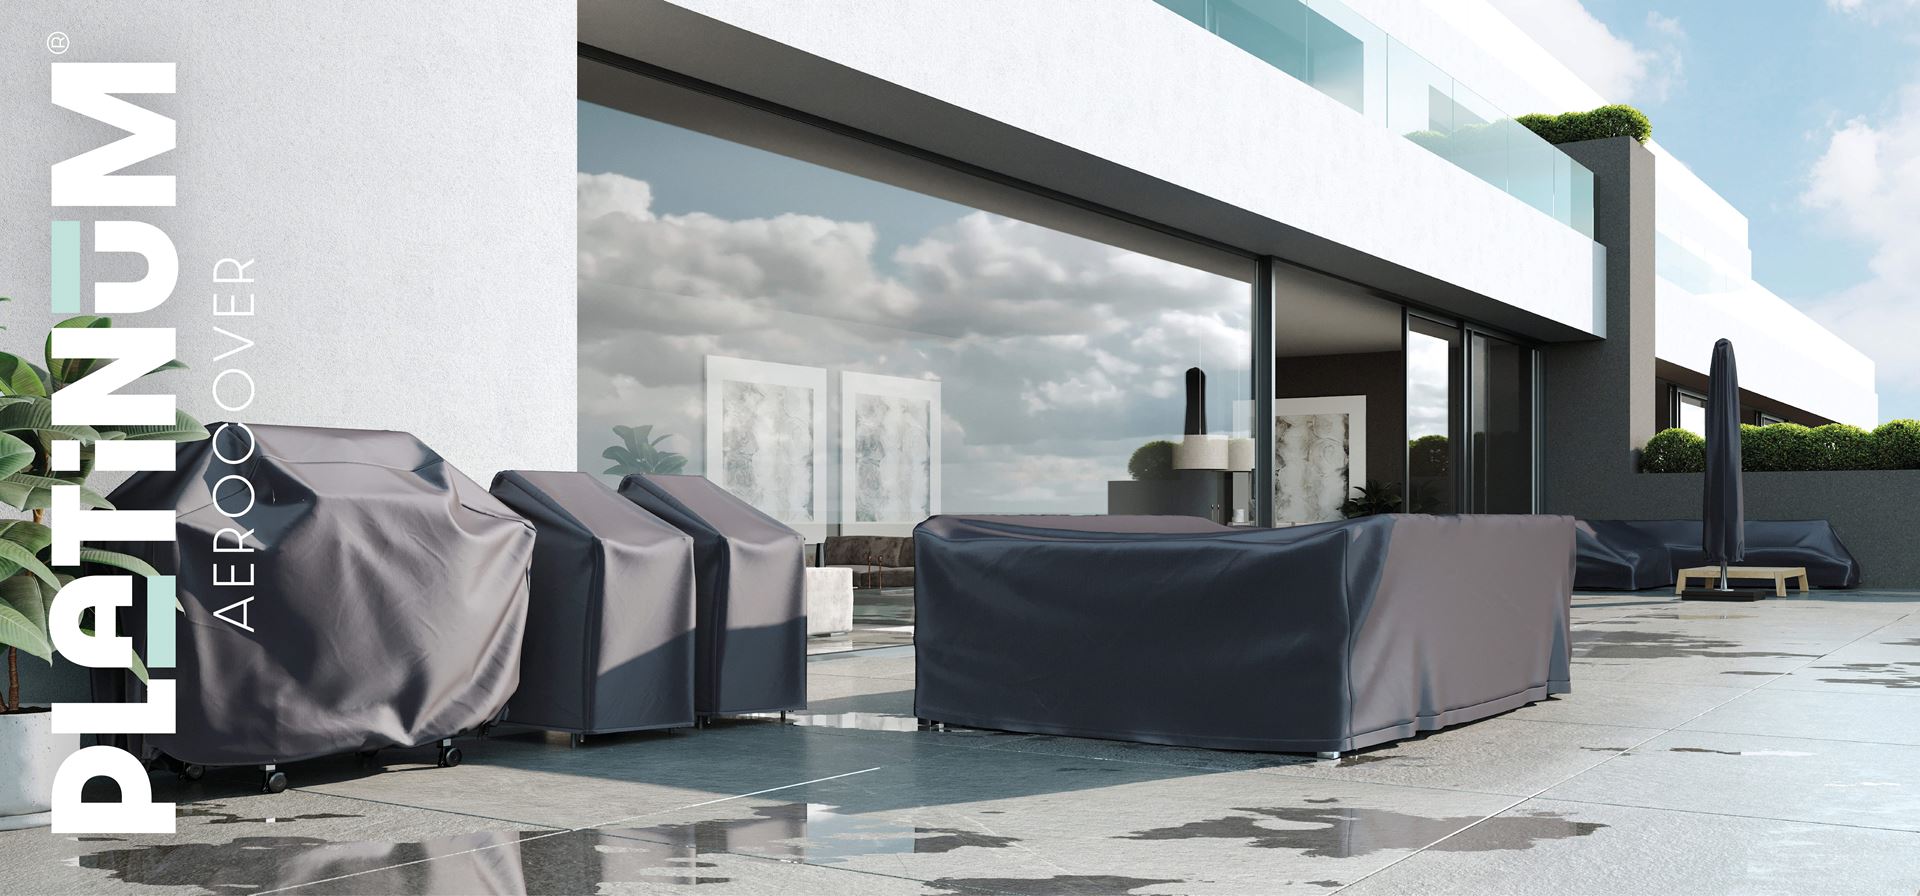 aerocover-loungesethoes-L-355x275x100xH70-rechts-antraciet